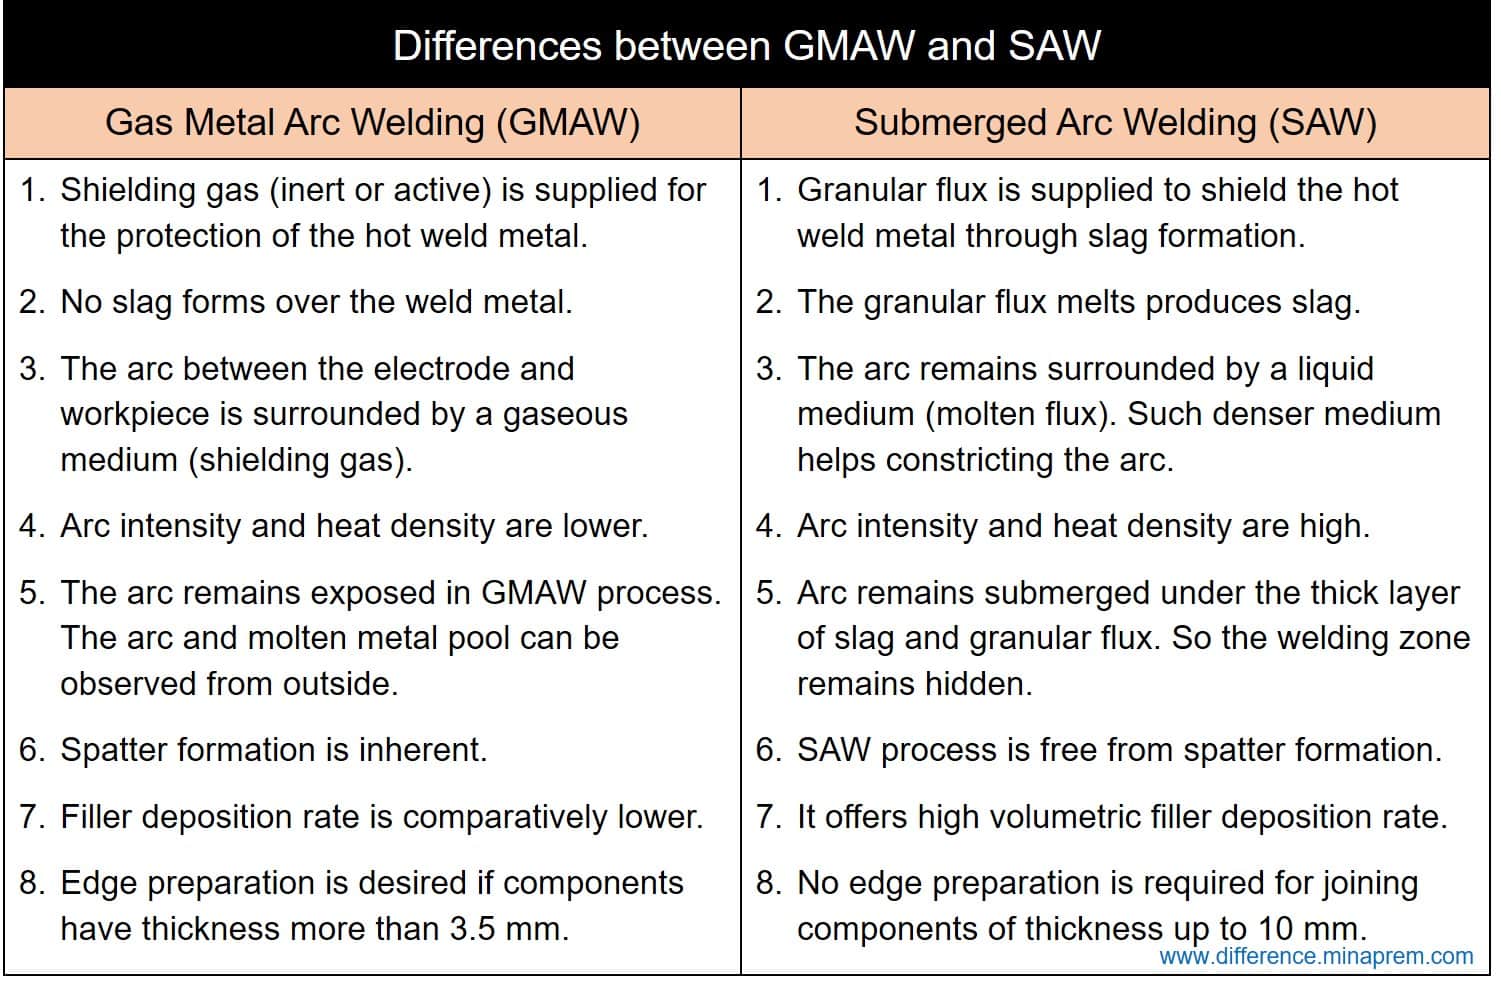 Difference between GMAW and SAW